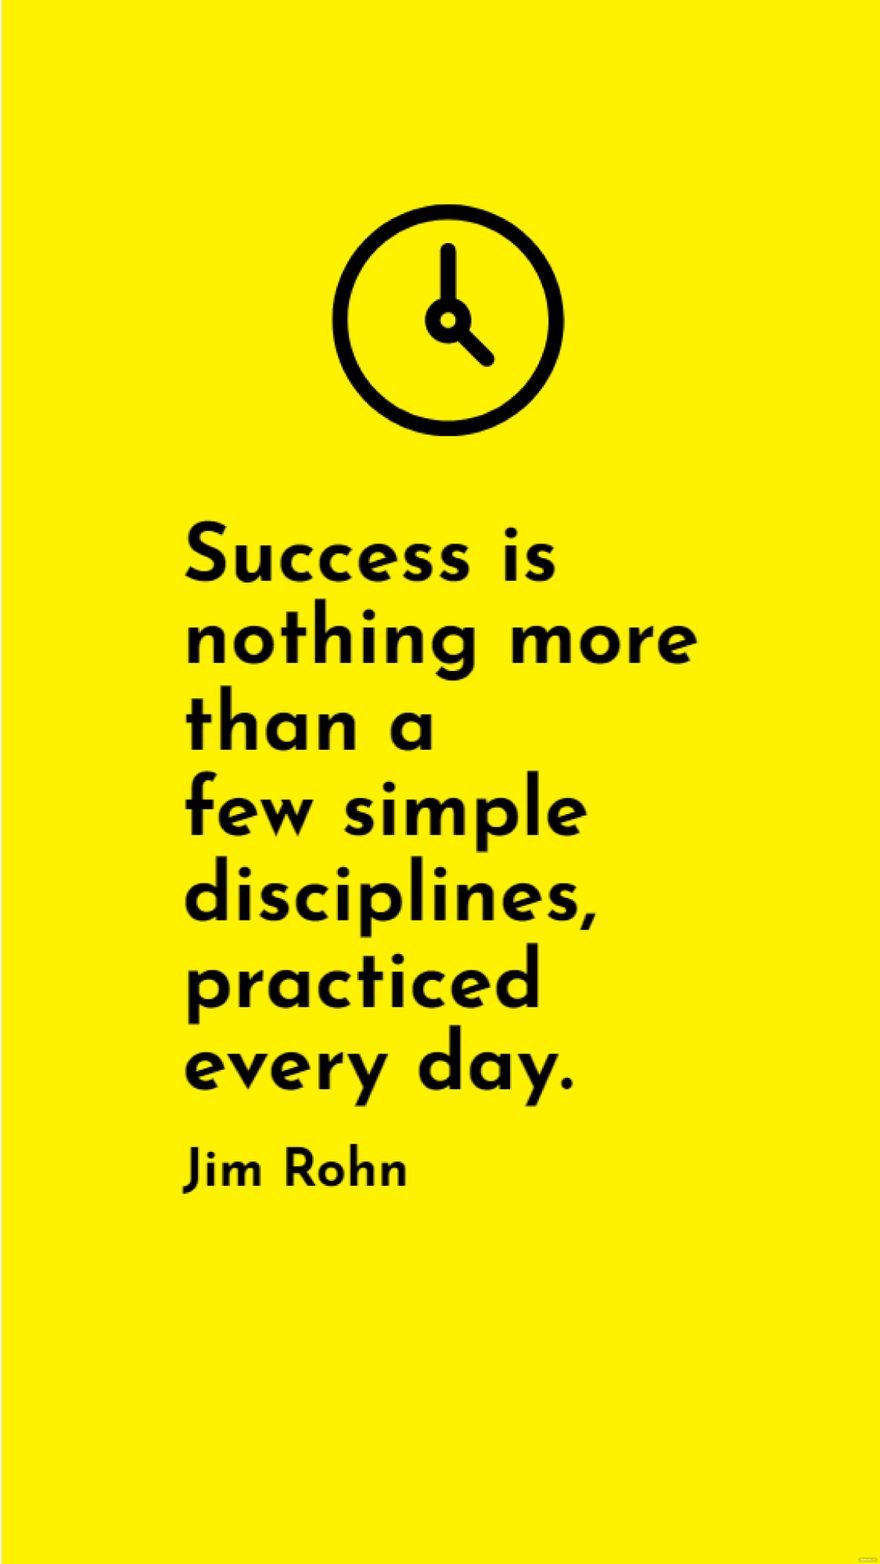 Jim Rohn - Success is nothing more than a few simple disciplines, practiced every day. in JPG